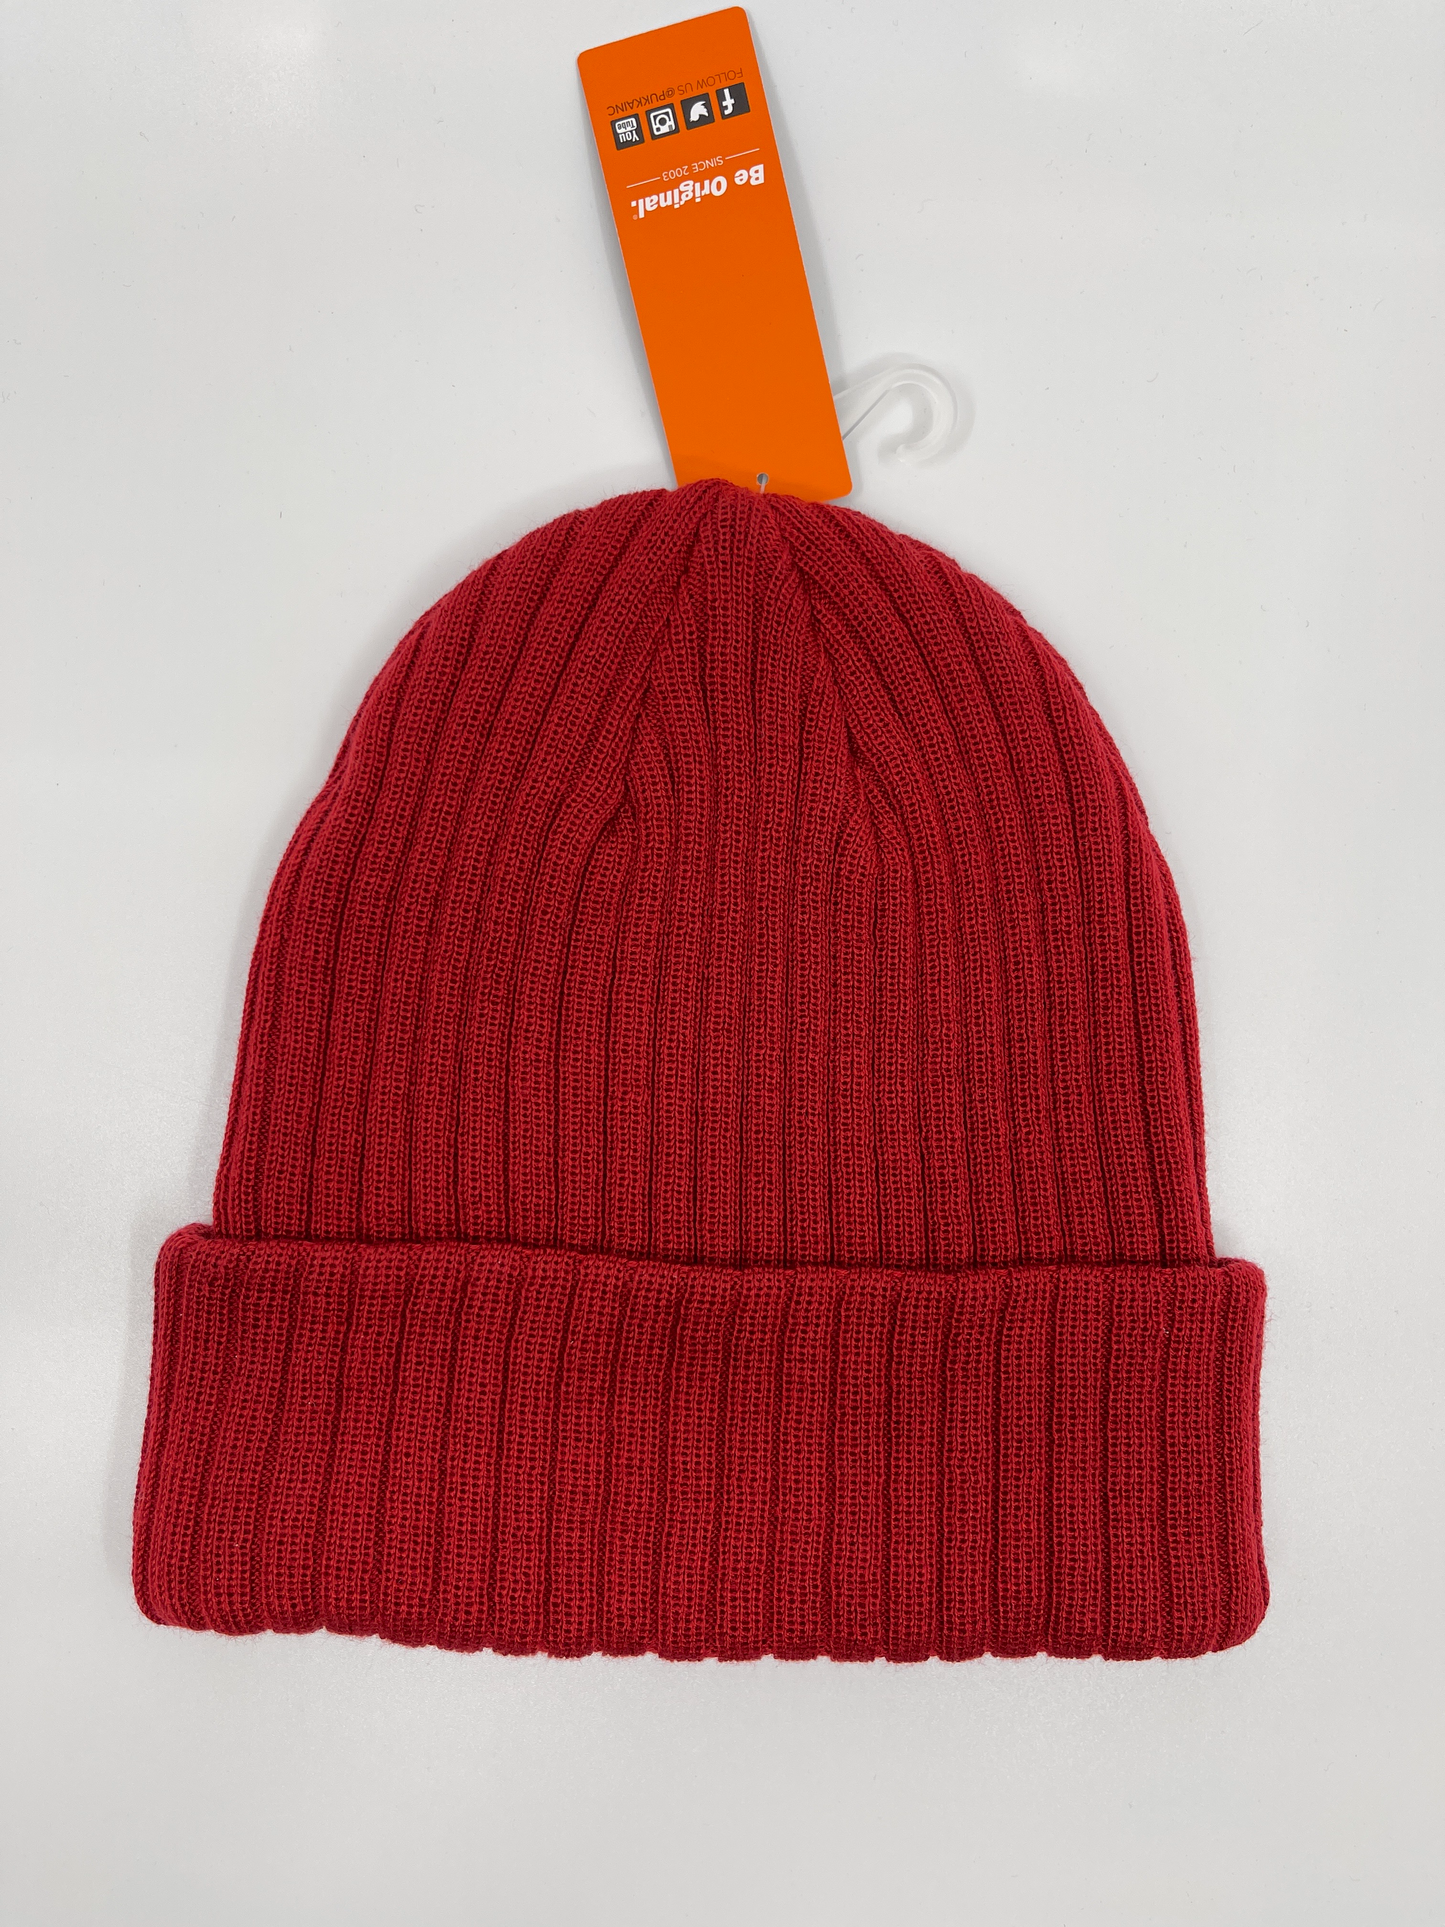 GooseKeeper Beanie Red with White patch